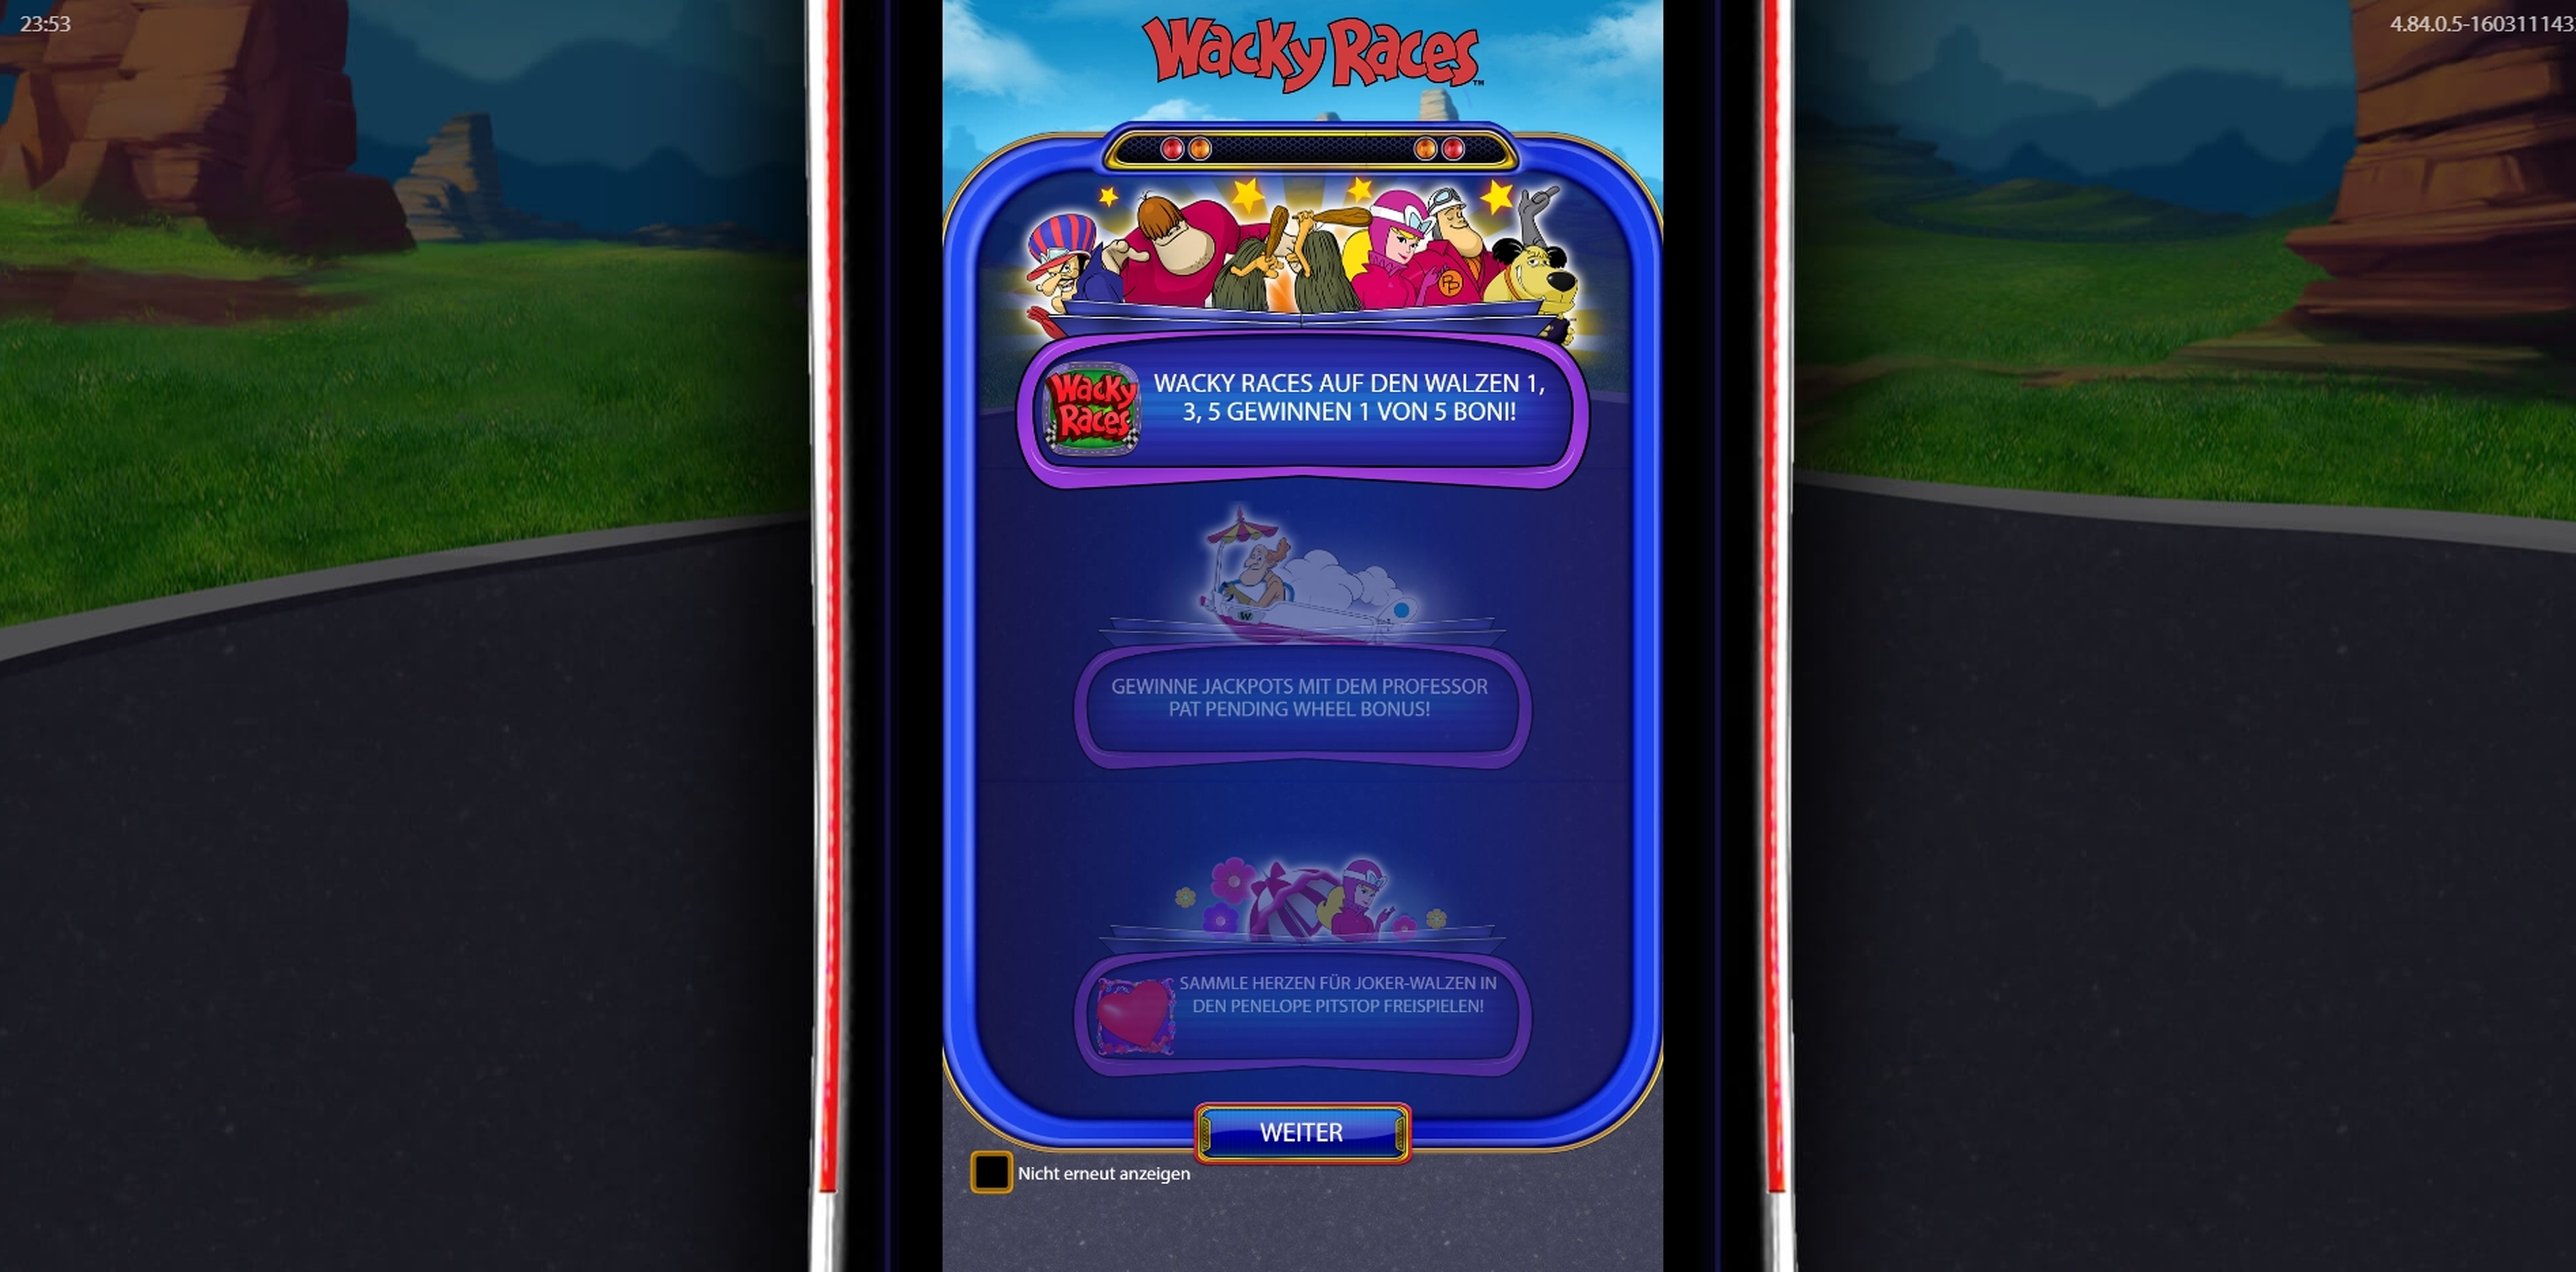 Play Wacky Races Free Casino Slot Game by WMS